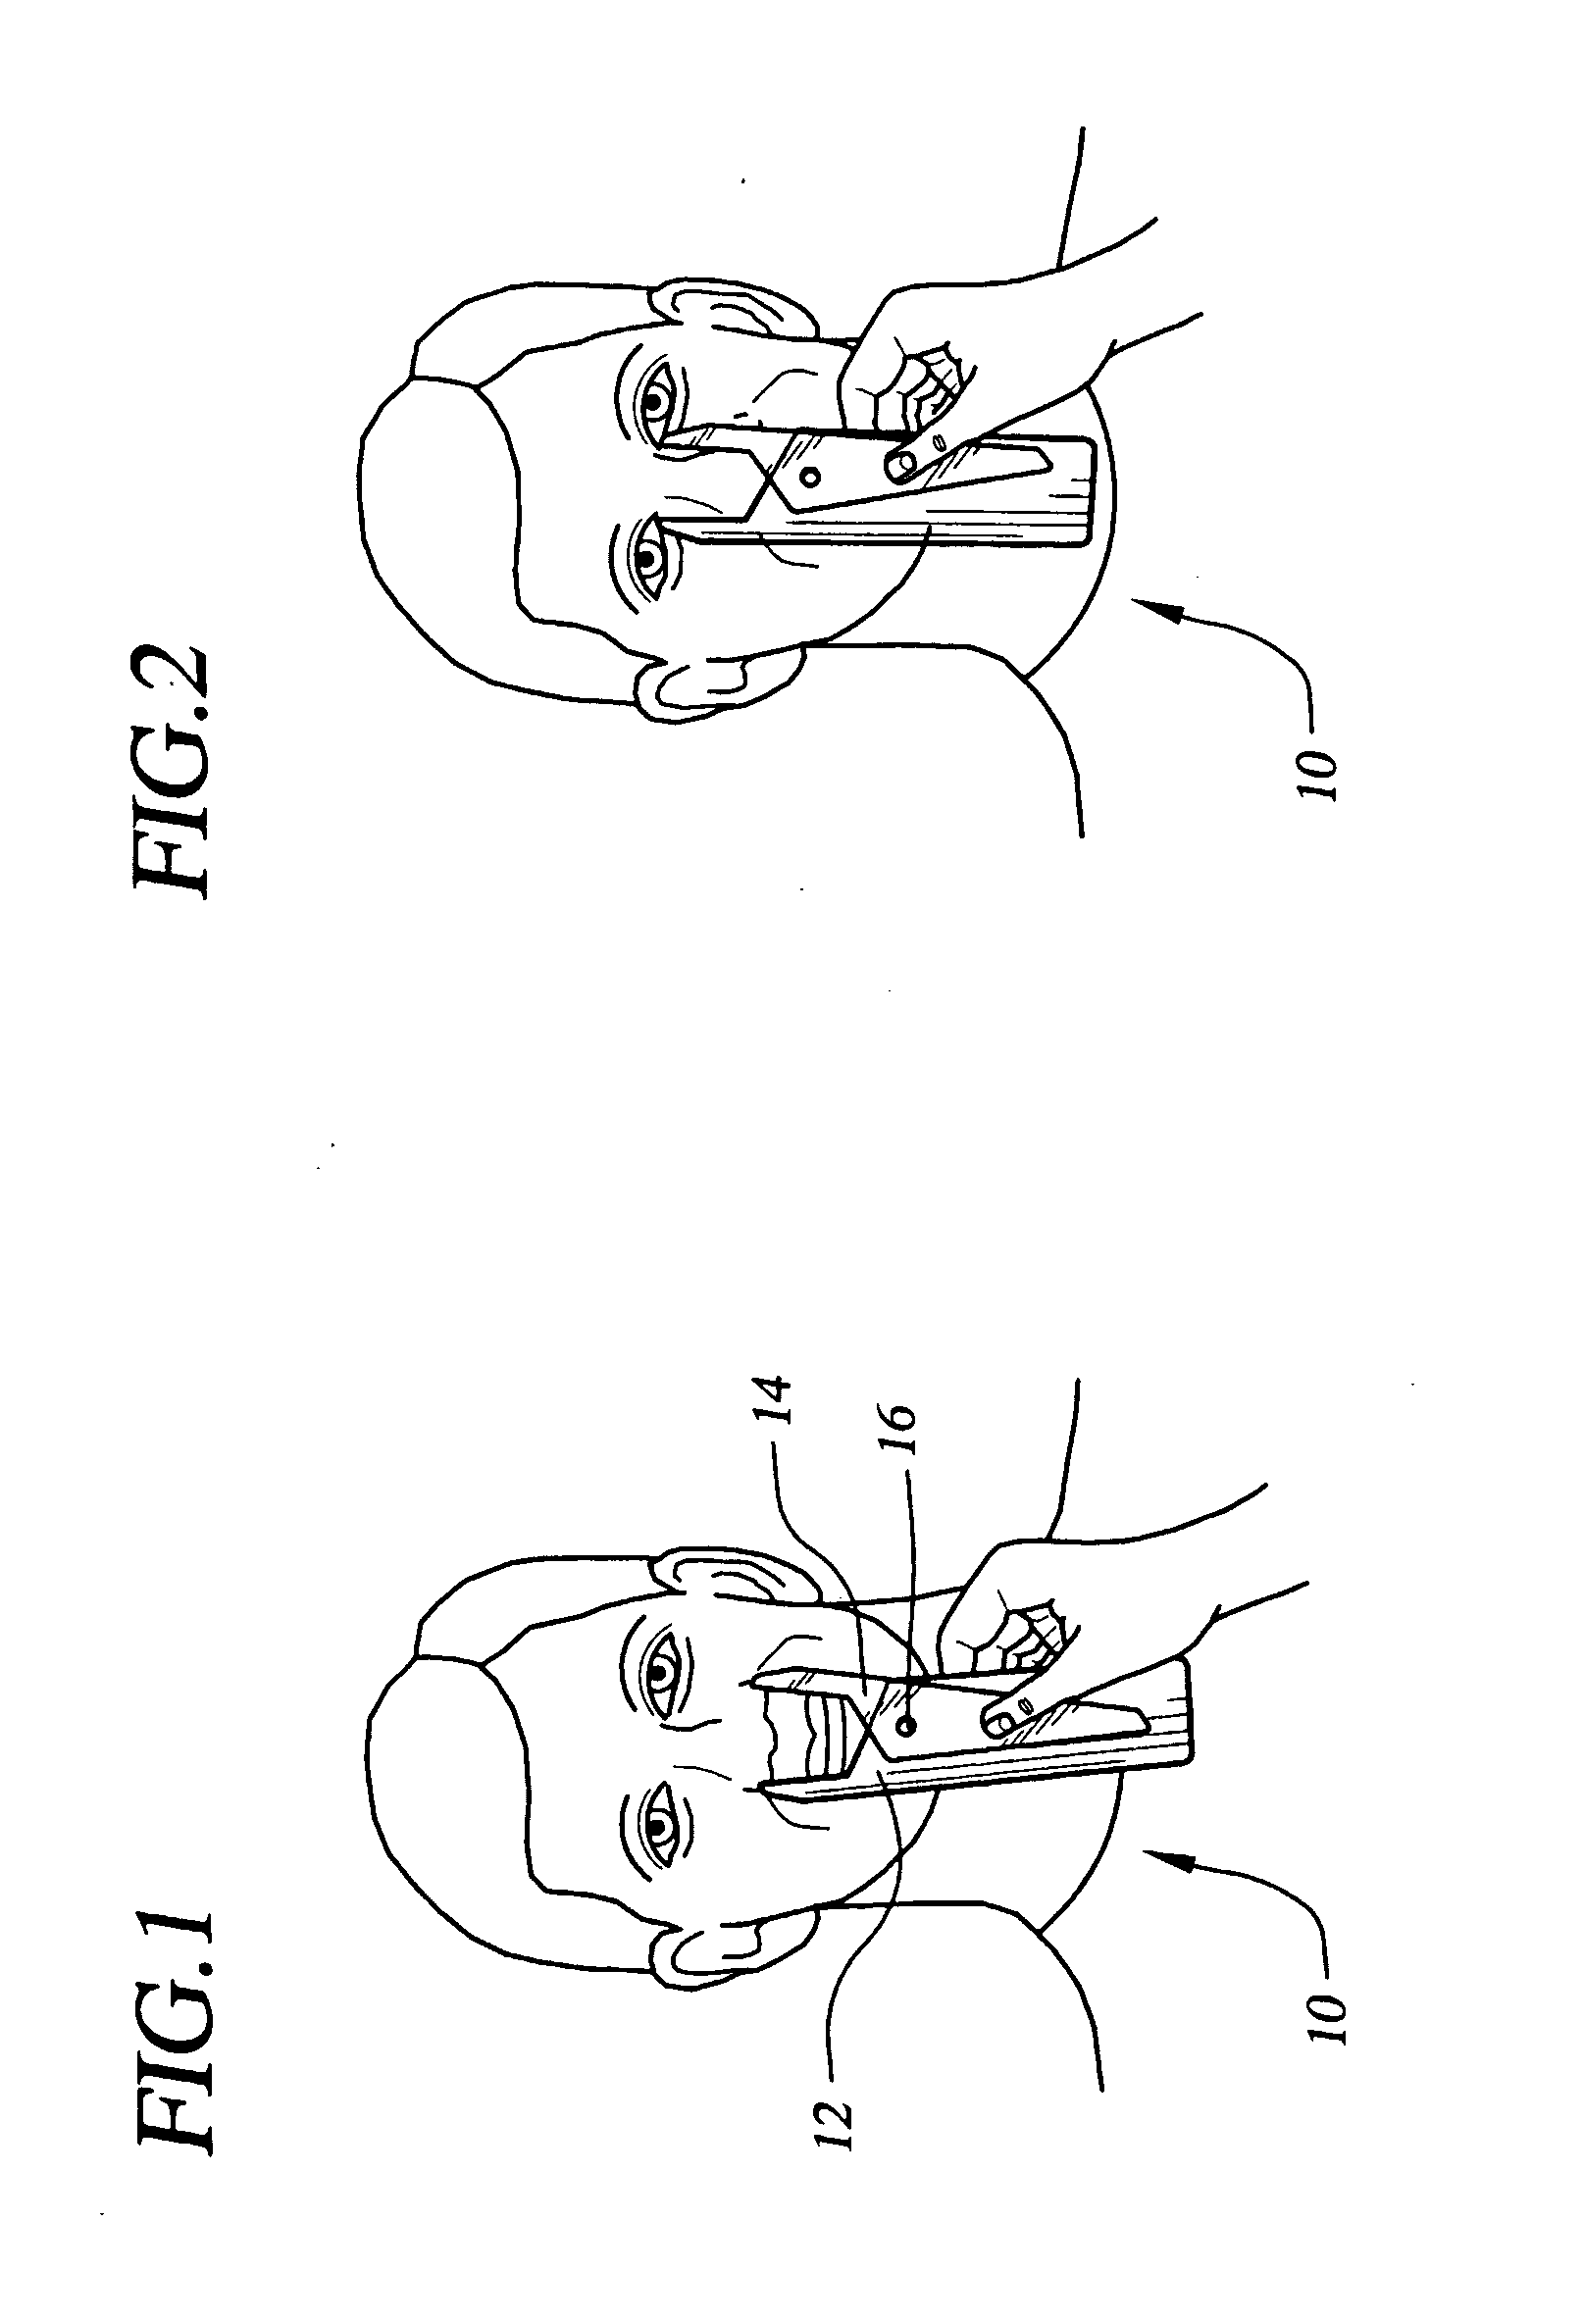 Method and apparatus for selecting denture teeth